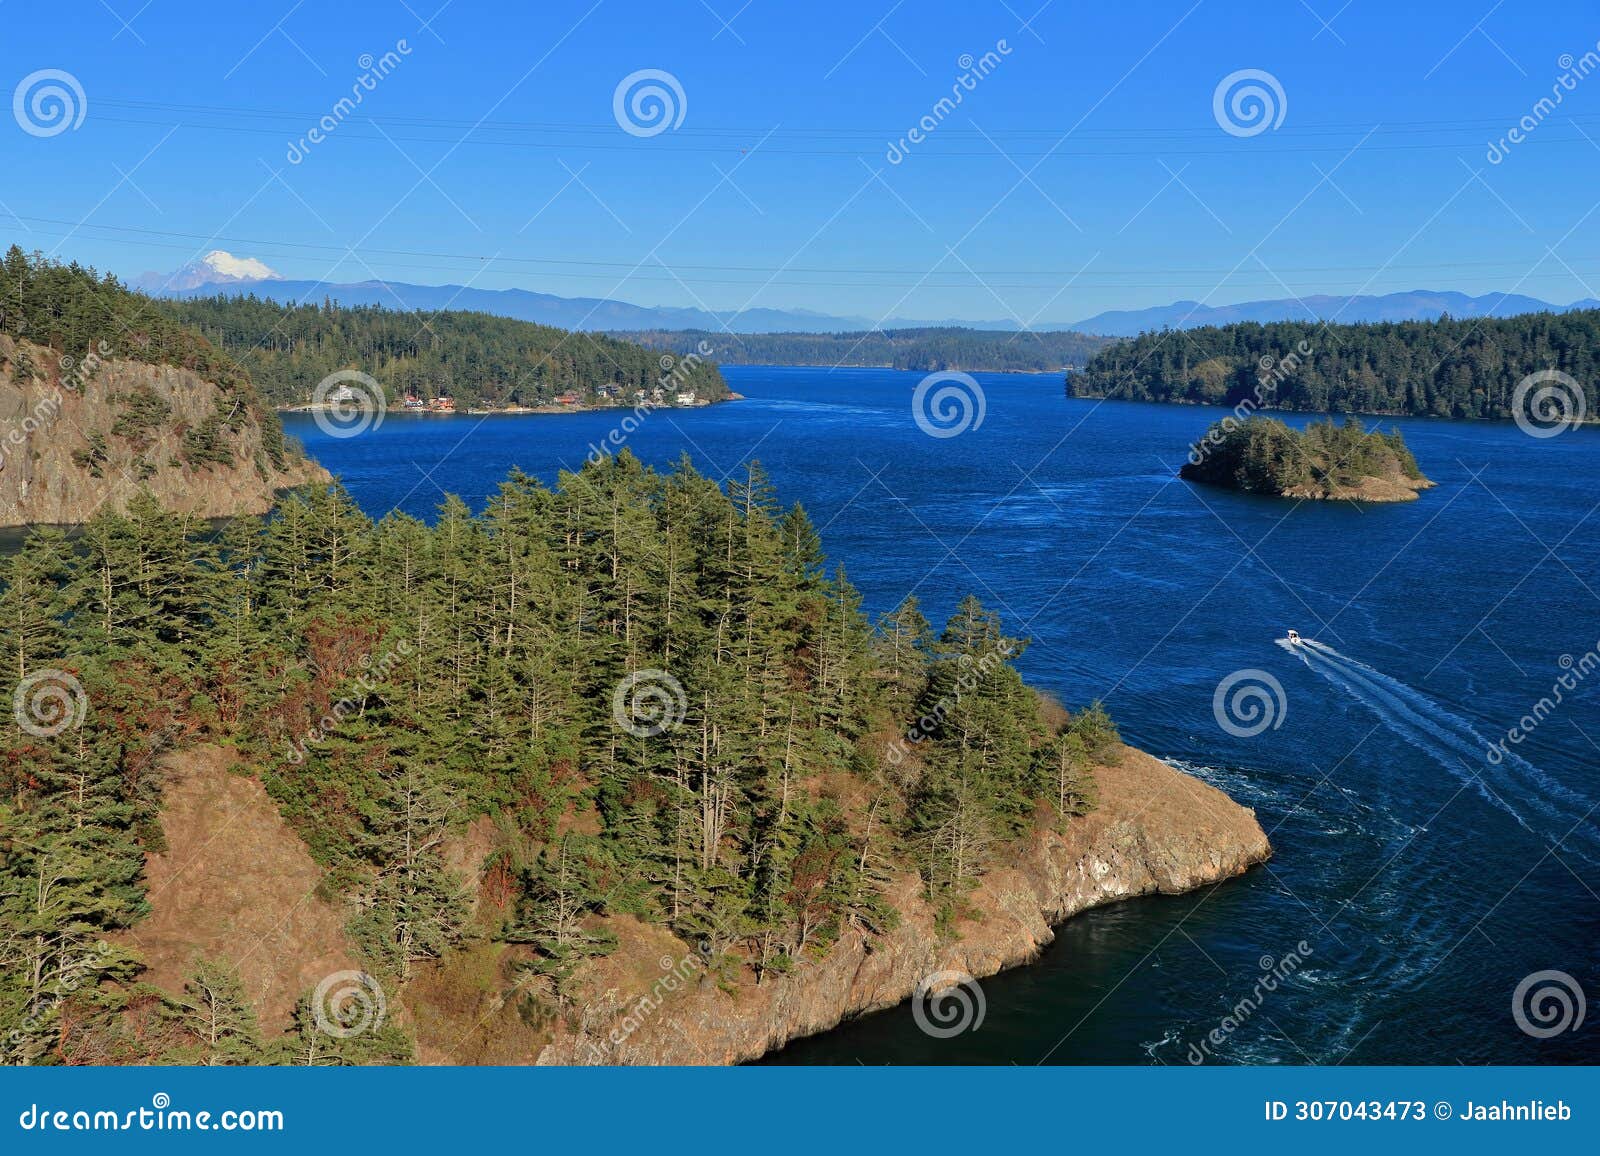 deception pass state park in evening light between fidalgo and whidbey island, washington state